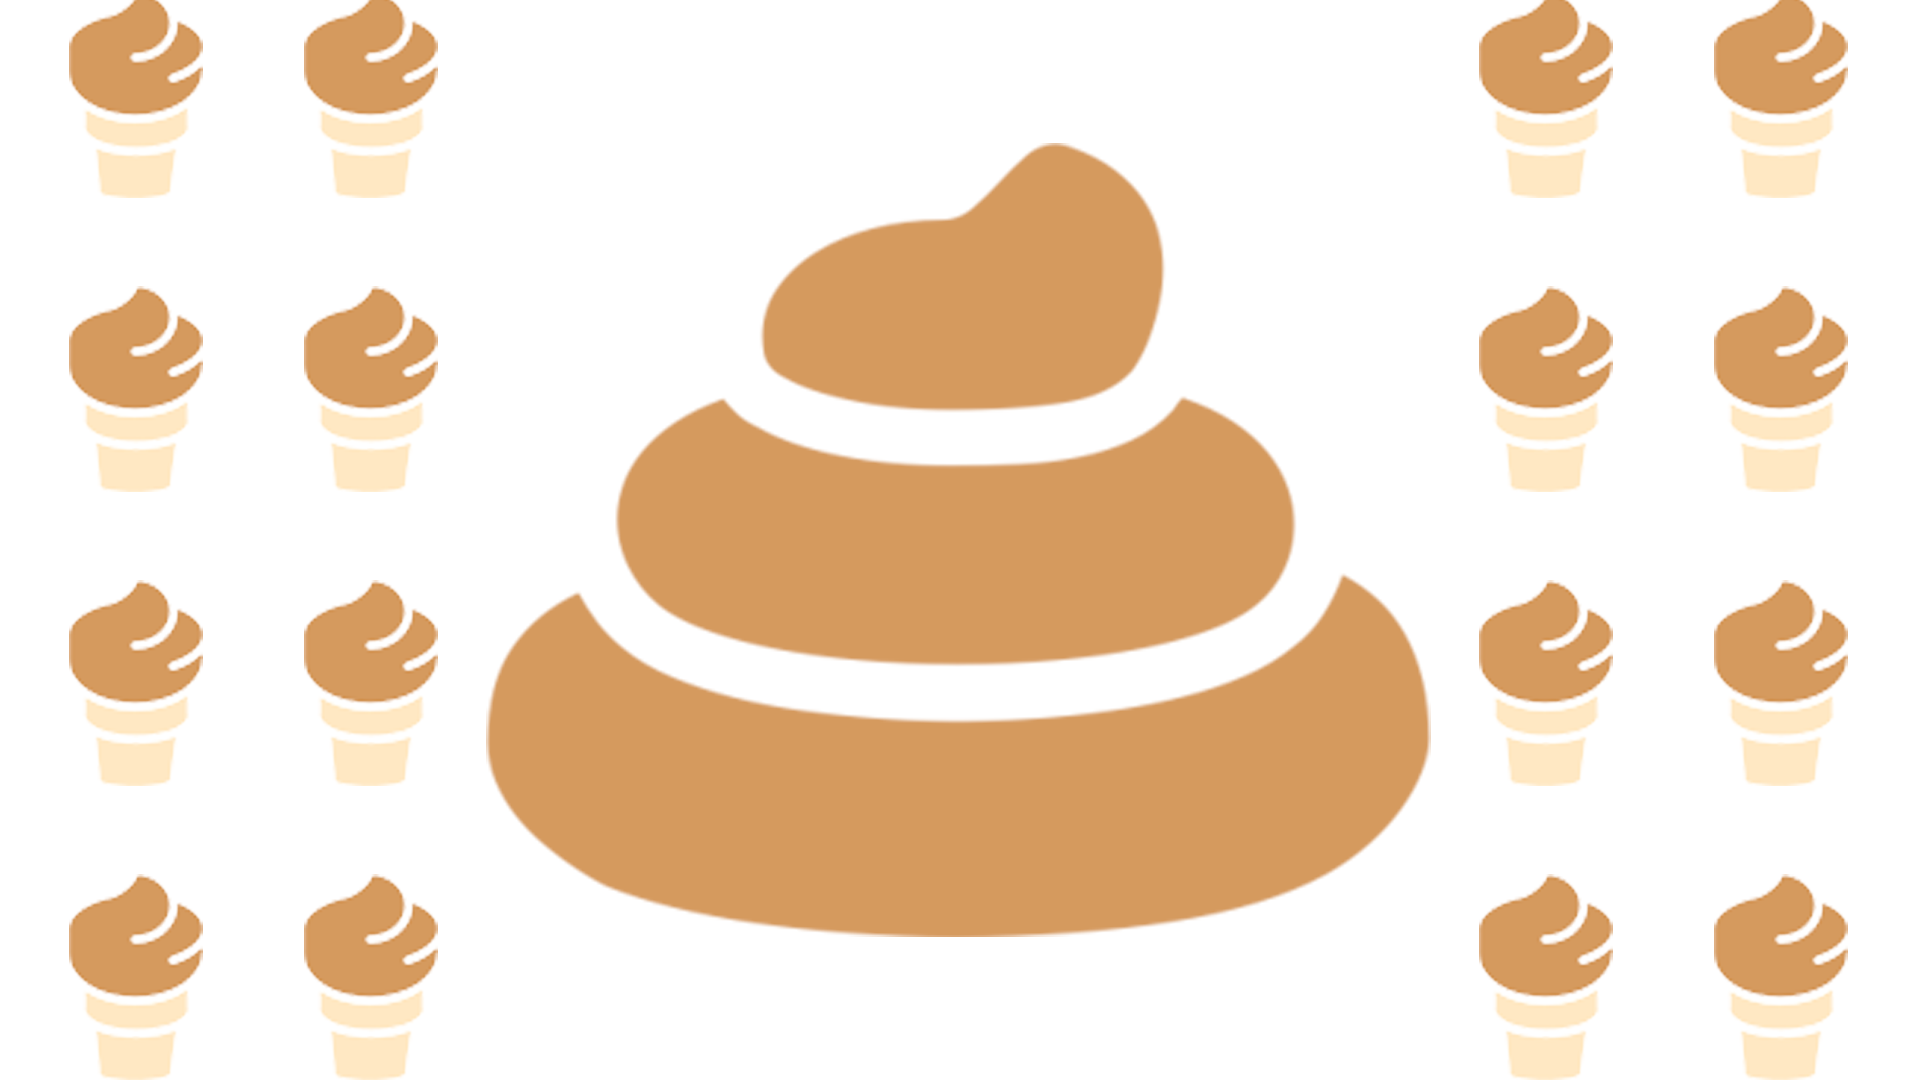 The old Microsoft poop and soft serve emoji, which look very similar!